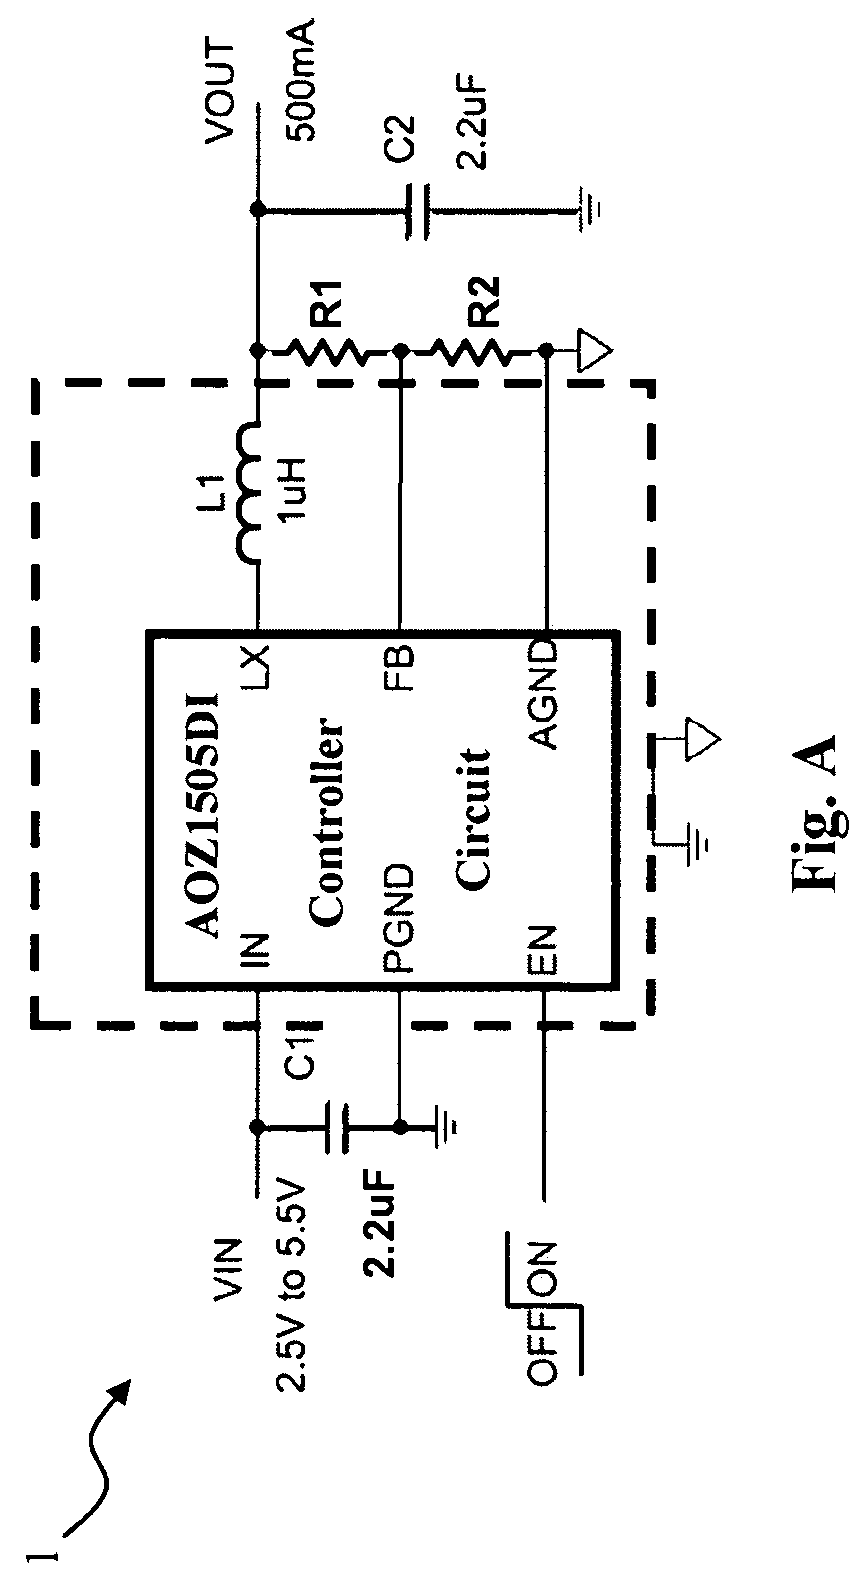 Compact power semiconductor package and method with stacked inductor and integrated circuit die